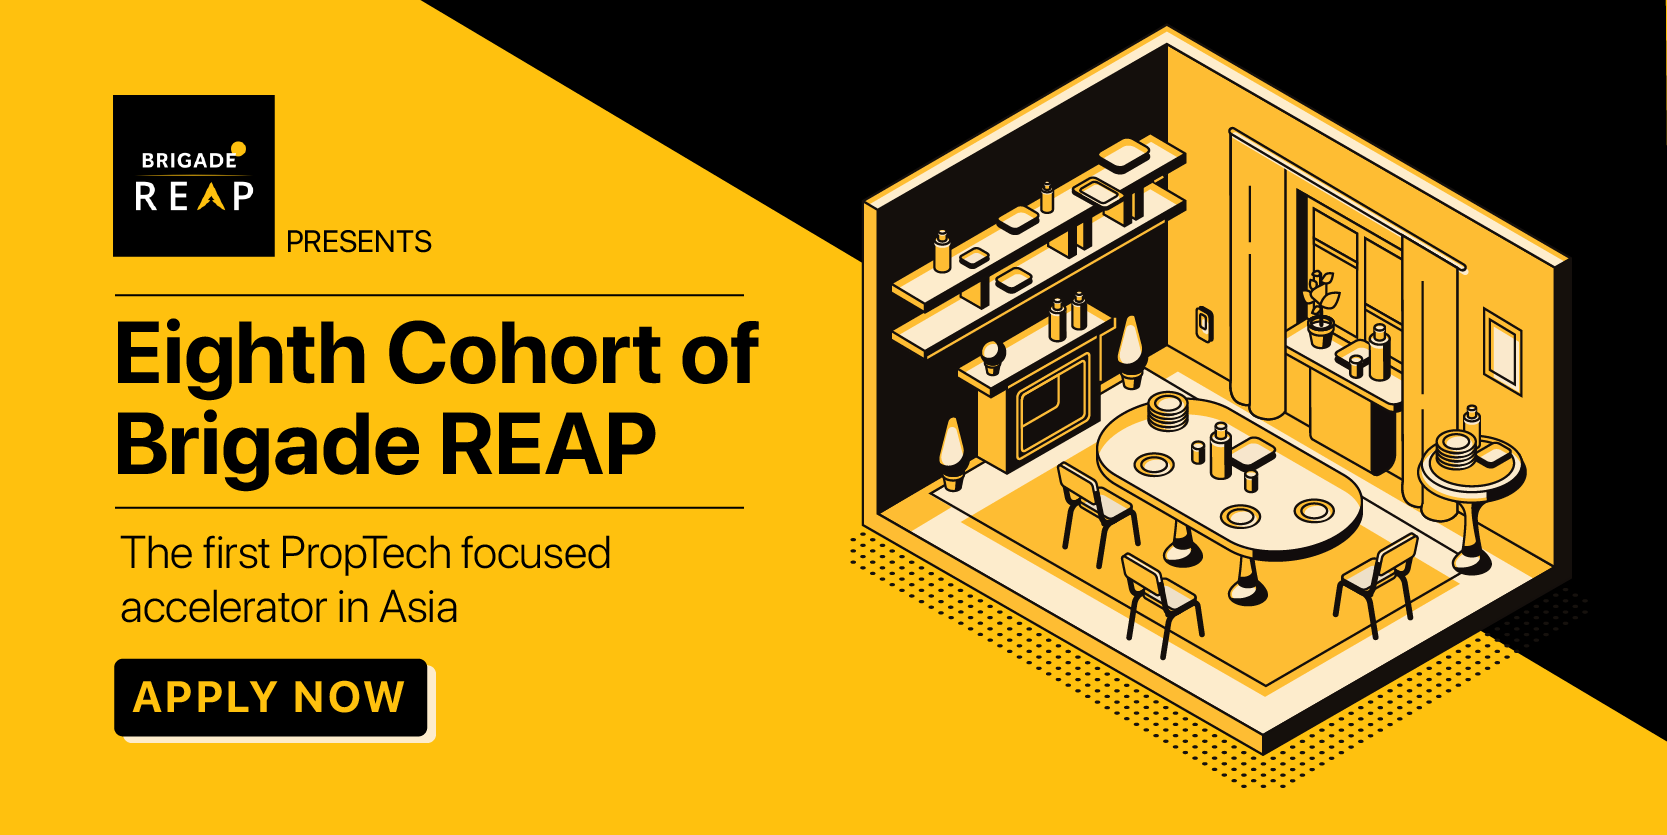 Applications are now open for the eighth cohort of Brigade REAP,  the first PropTech focused accelerator in Asia